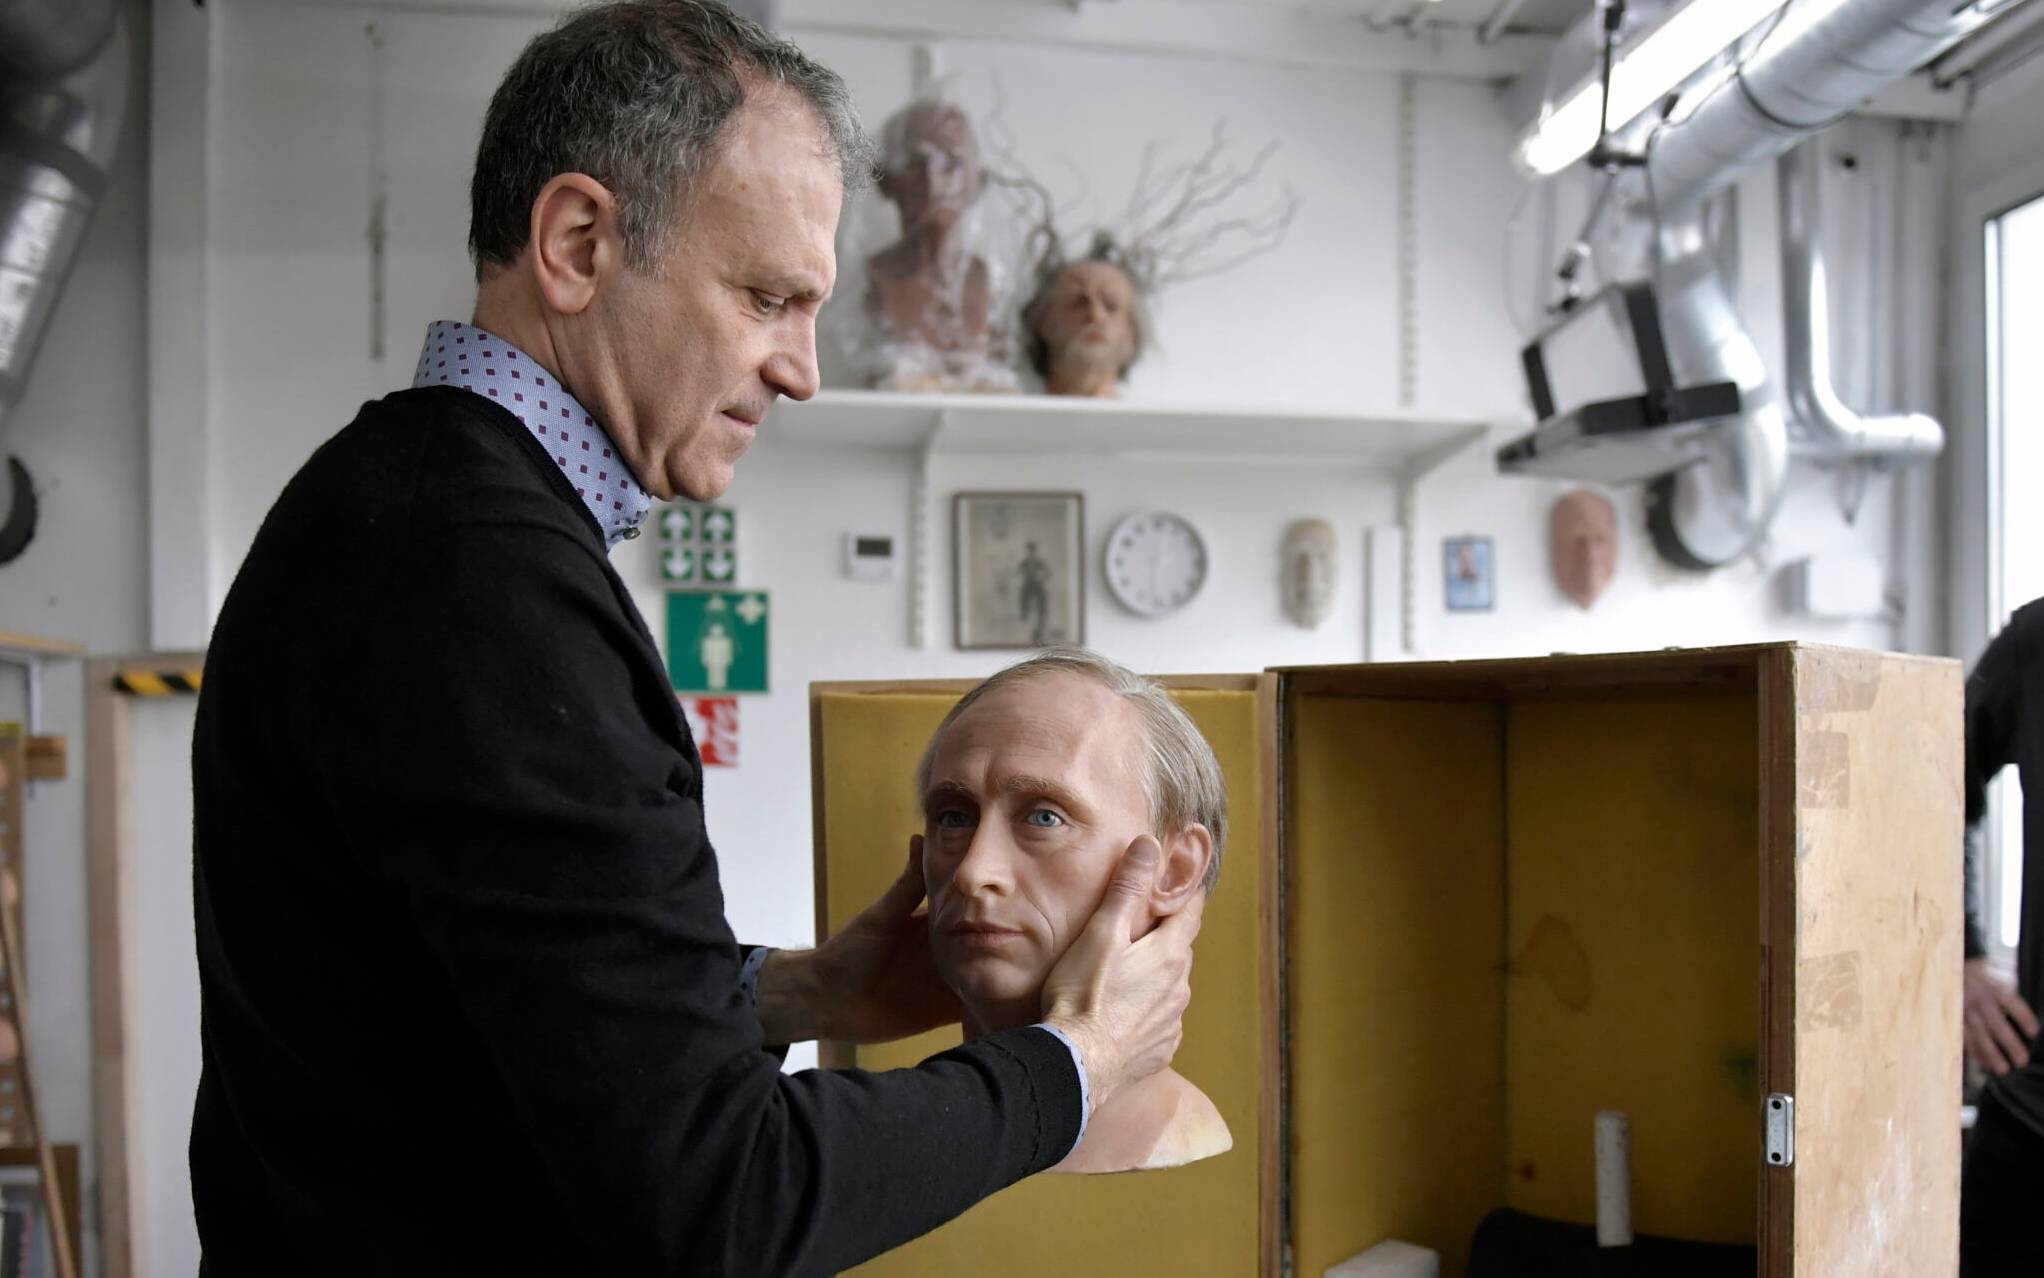 Yves Delhommeau, Musee Grevin's French Director General, packs a wax statue of Russian President Vladimir Putin before it is stored in the reseve, as a reaction to Russia's invasion of Ukraine on March 1, 2022 at the Grevin museum in Paris. (Photo by JULIEN DE ROSA / AFP)